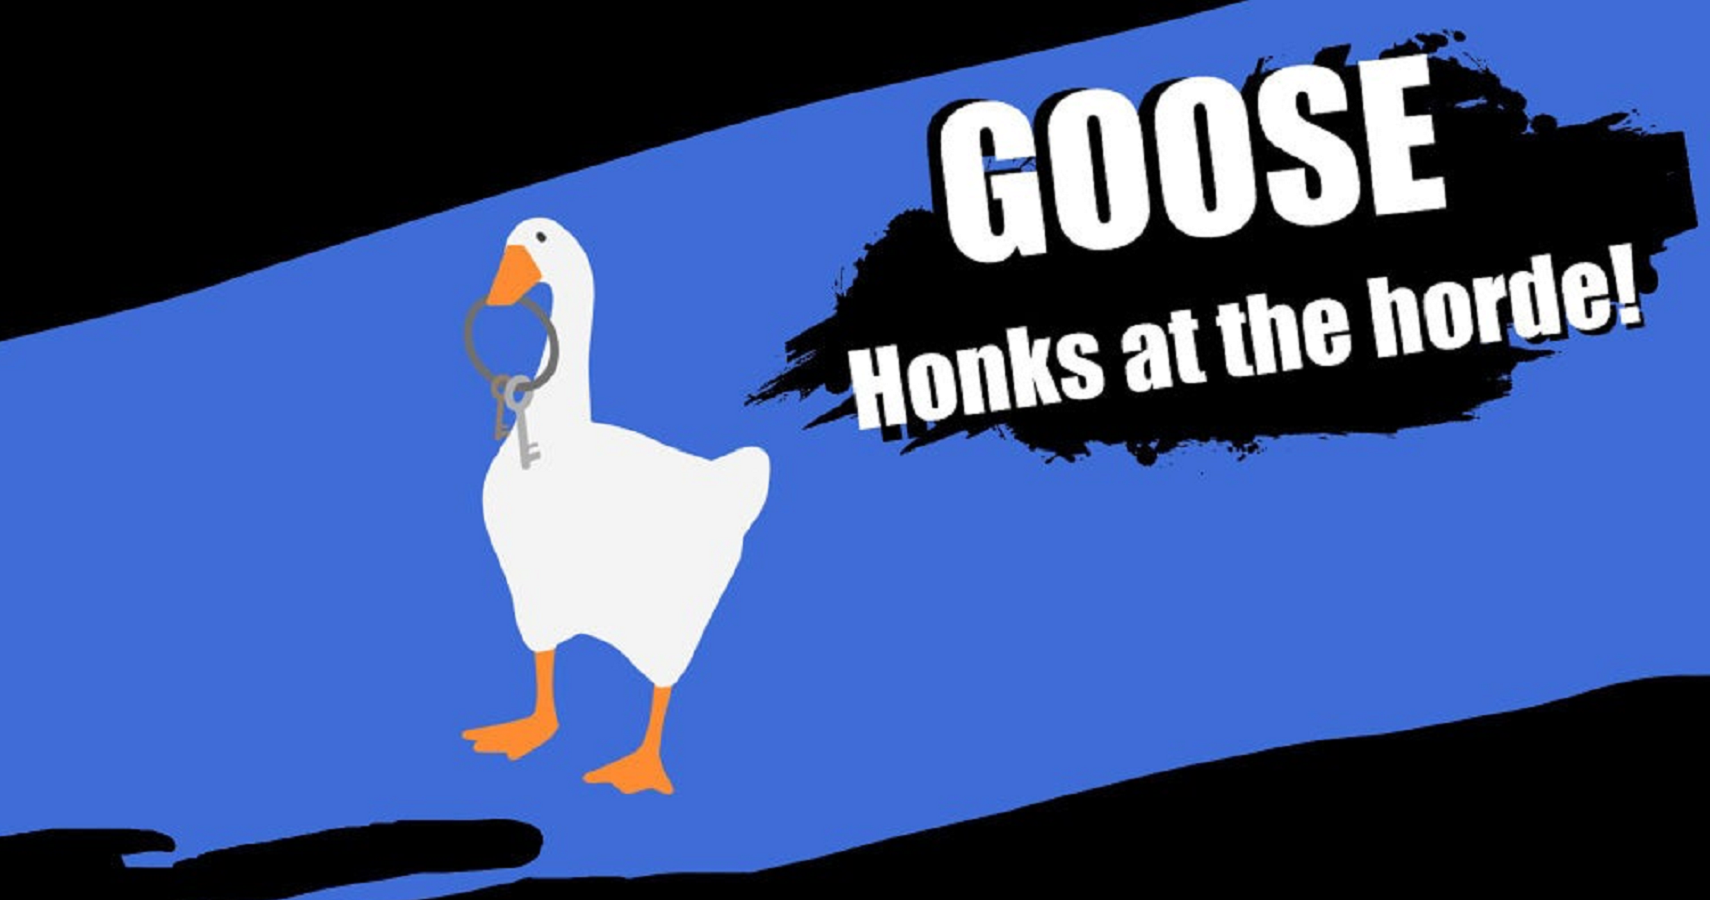 Playing 'Untitled Goose Game' is the new punching a wall - The